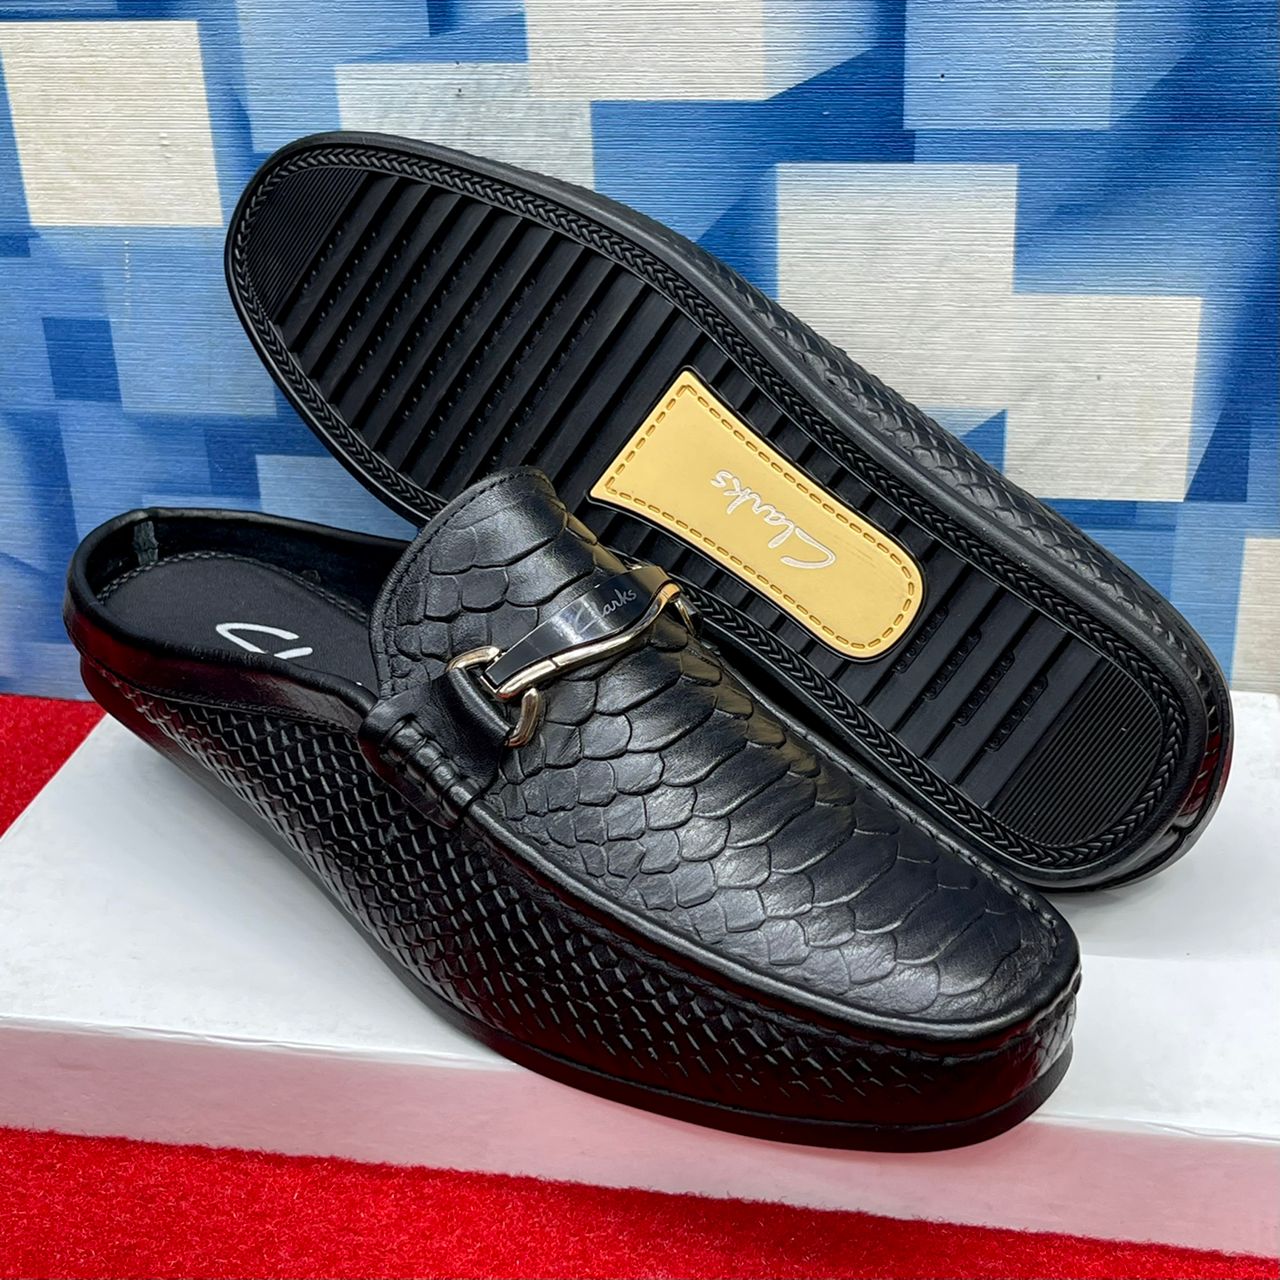 MEN'S QUALITY DESIGNERS HALF SHOE  CartRollers ﻿Online Marketplace  Shopping Store In Lagos Nigeria